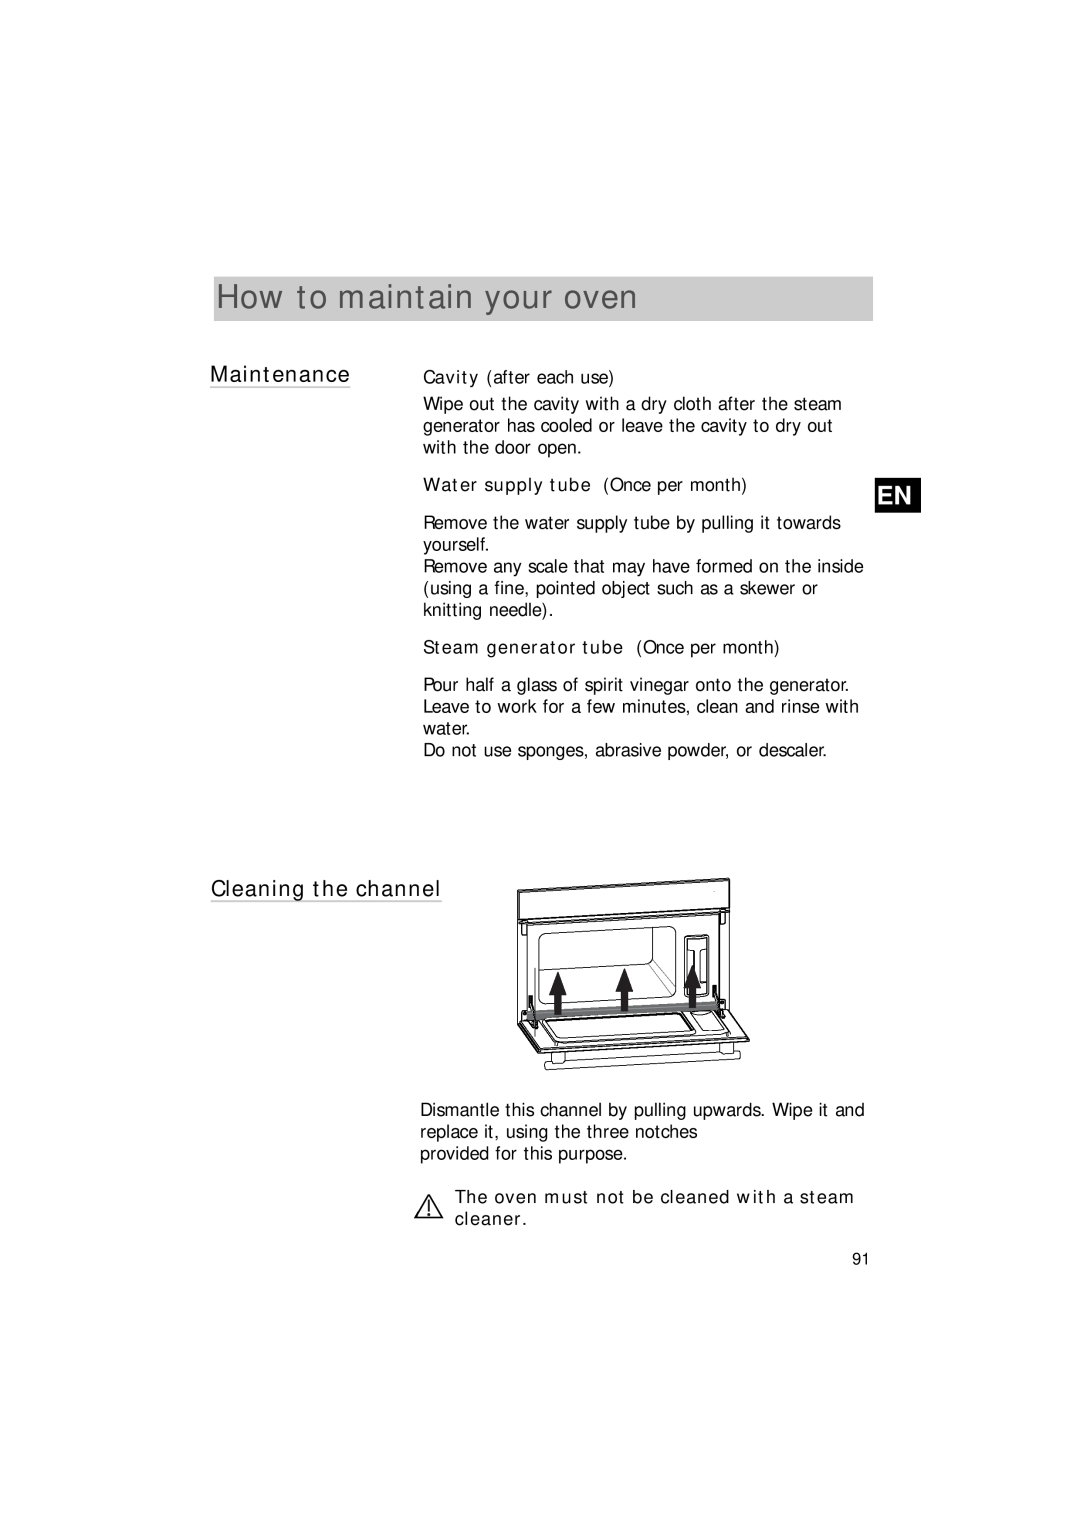 Hotpoint SEO100 manual How to maintain your oven, Maintenance, Cleaning the channel 